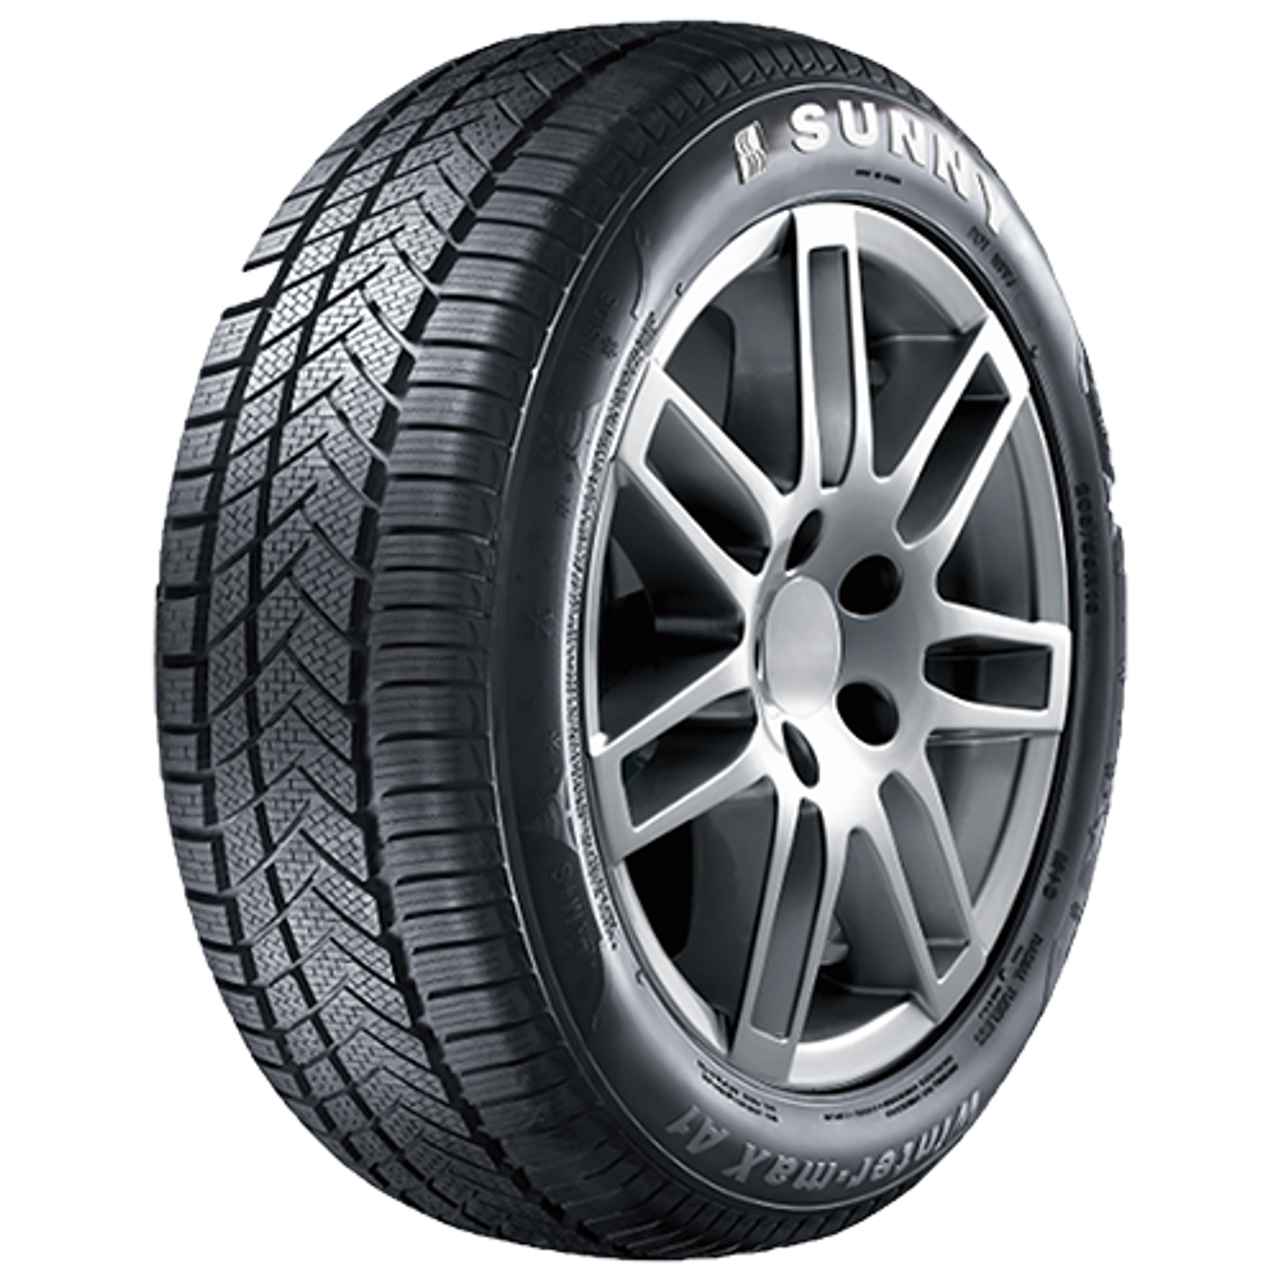 SUNNY WINTERMAX NW211 205/55R17 95V BSW